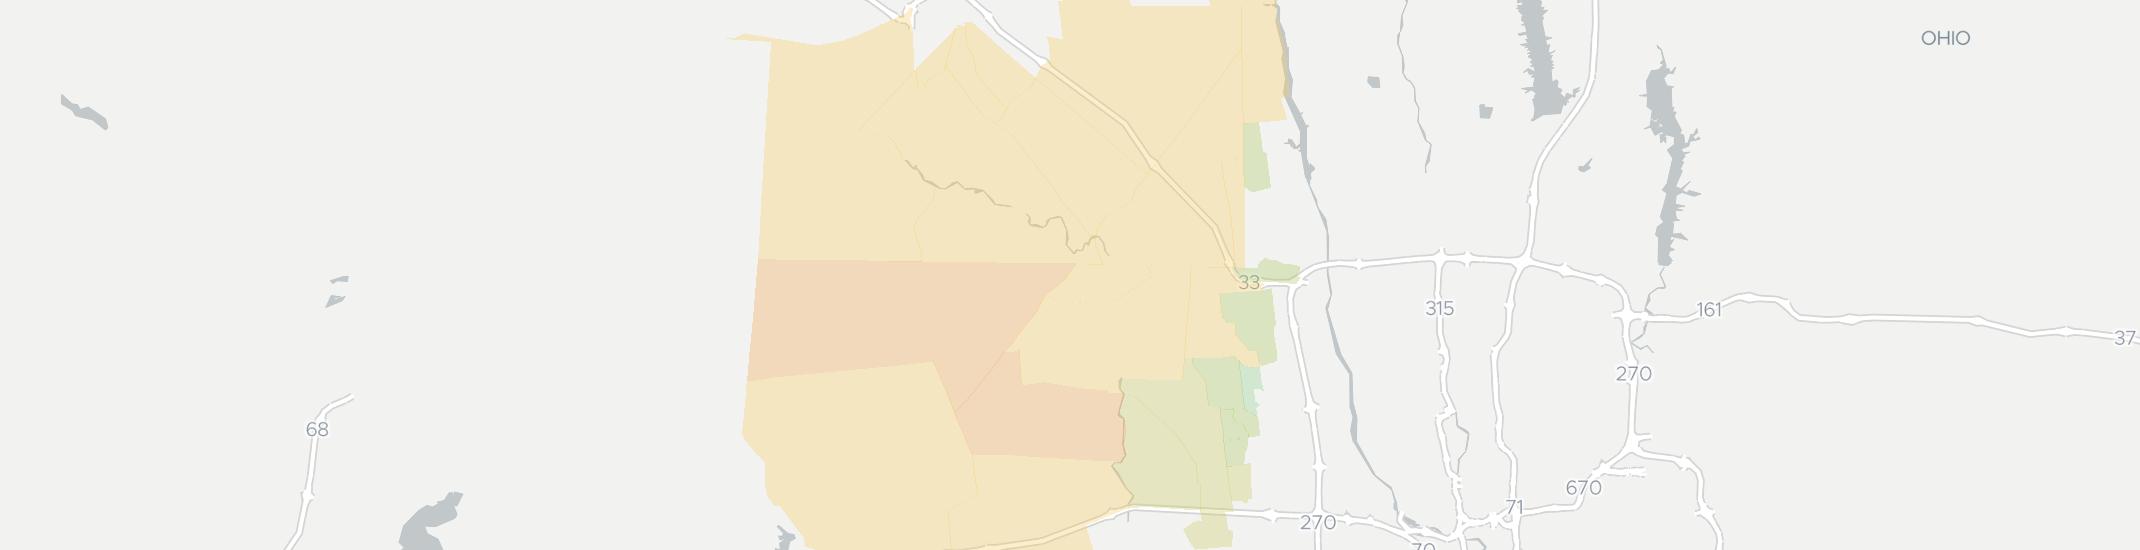 Plain City Internet Competition Map. Click for interactive map.